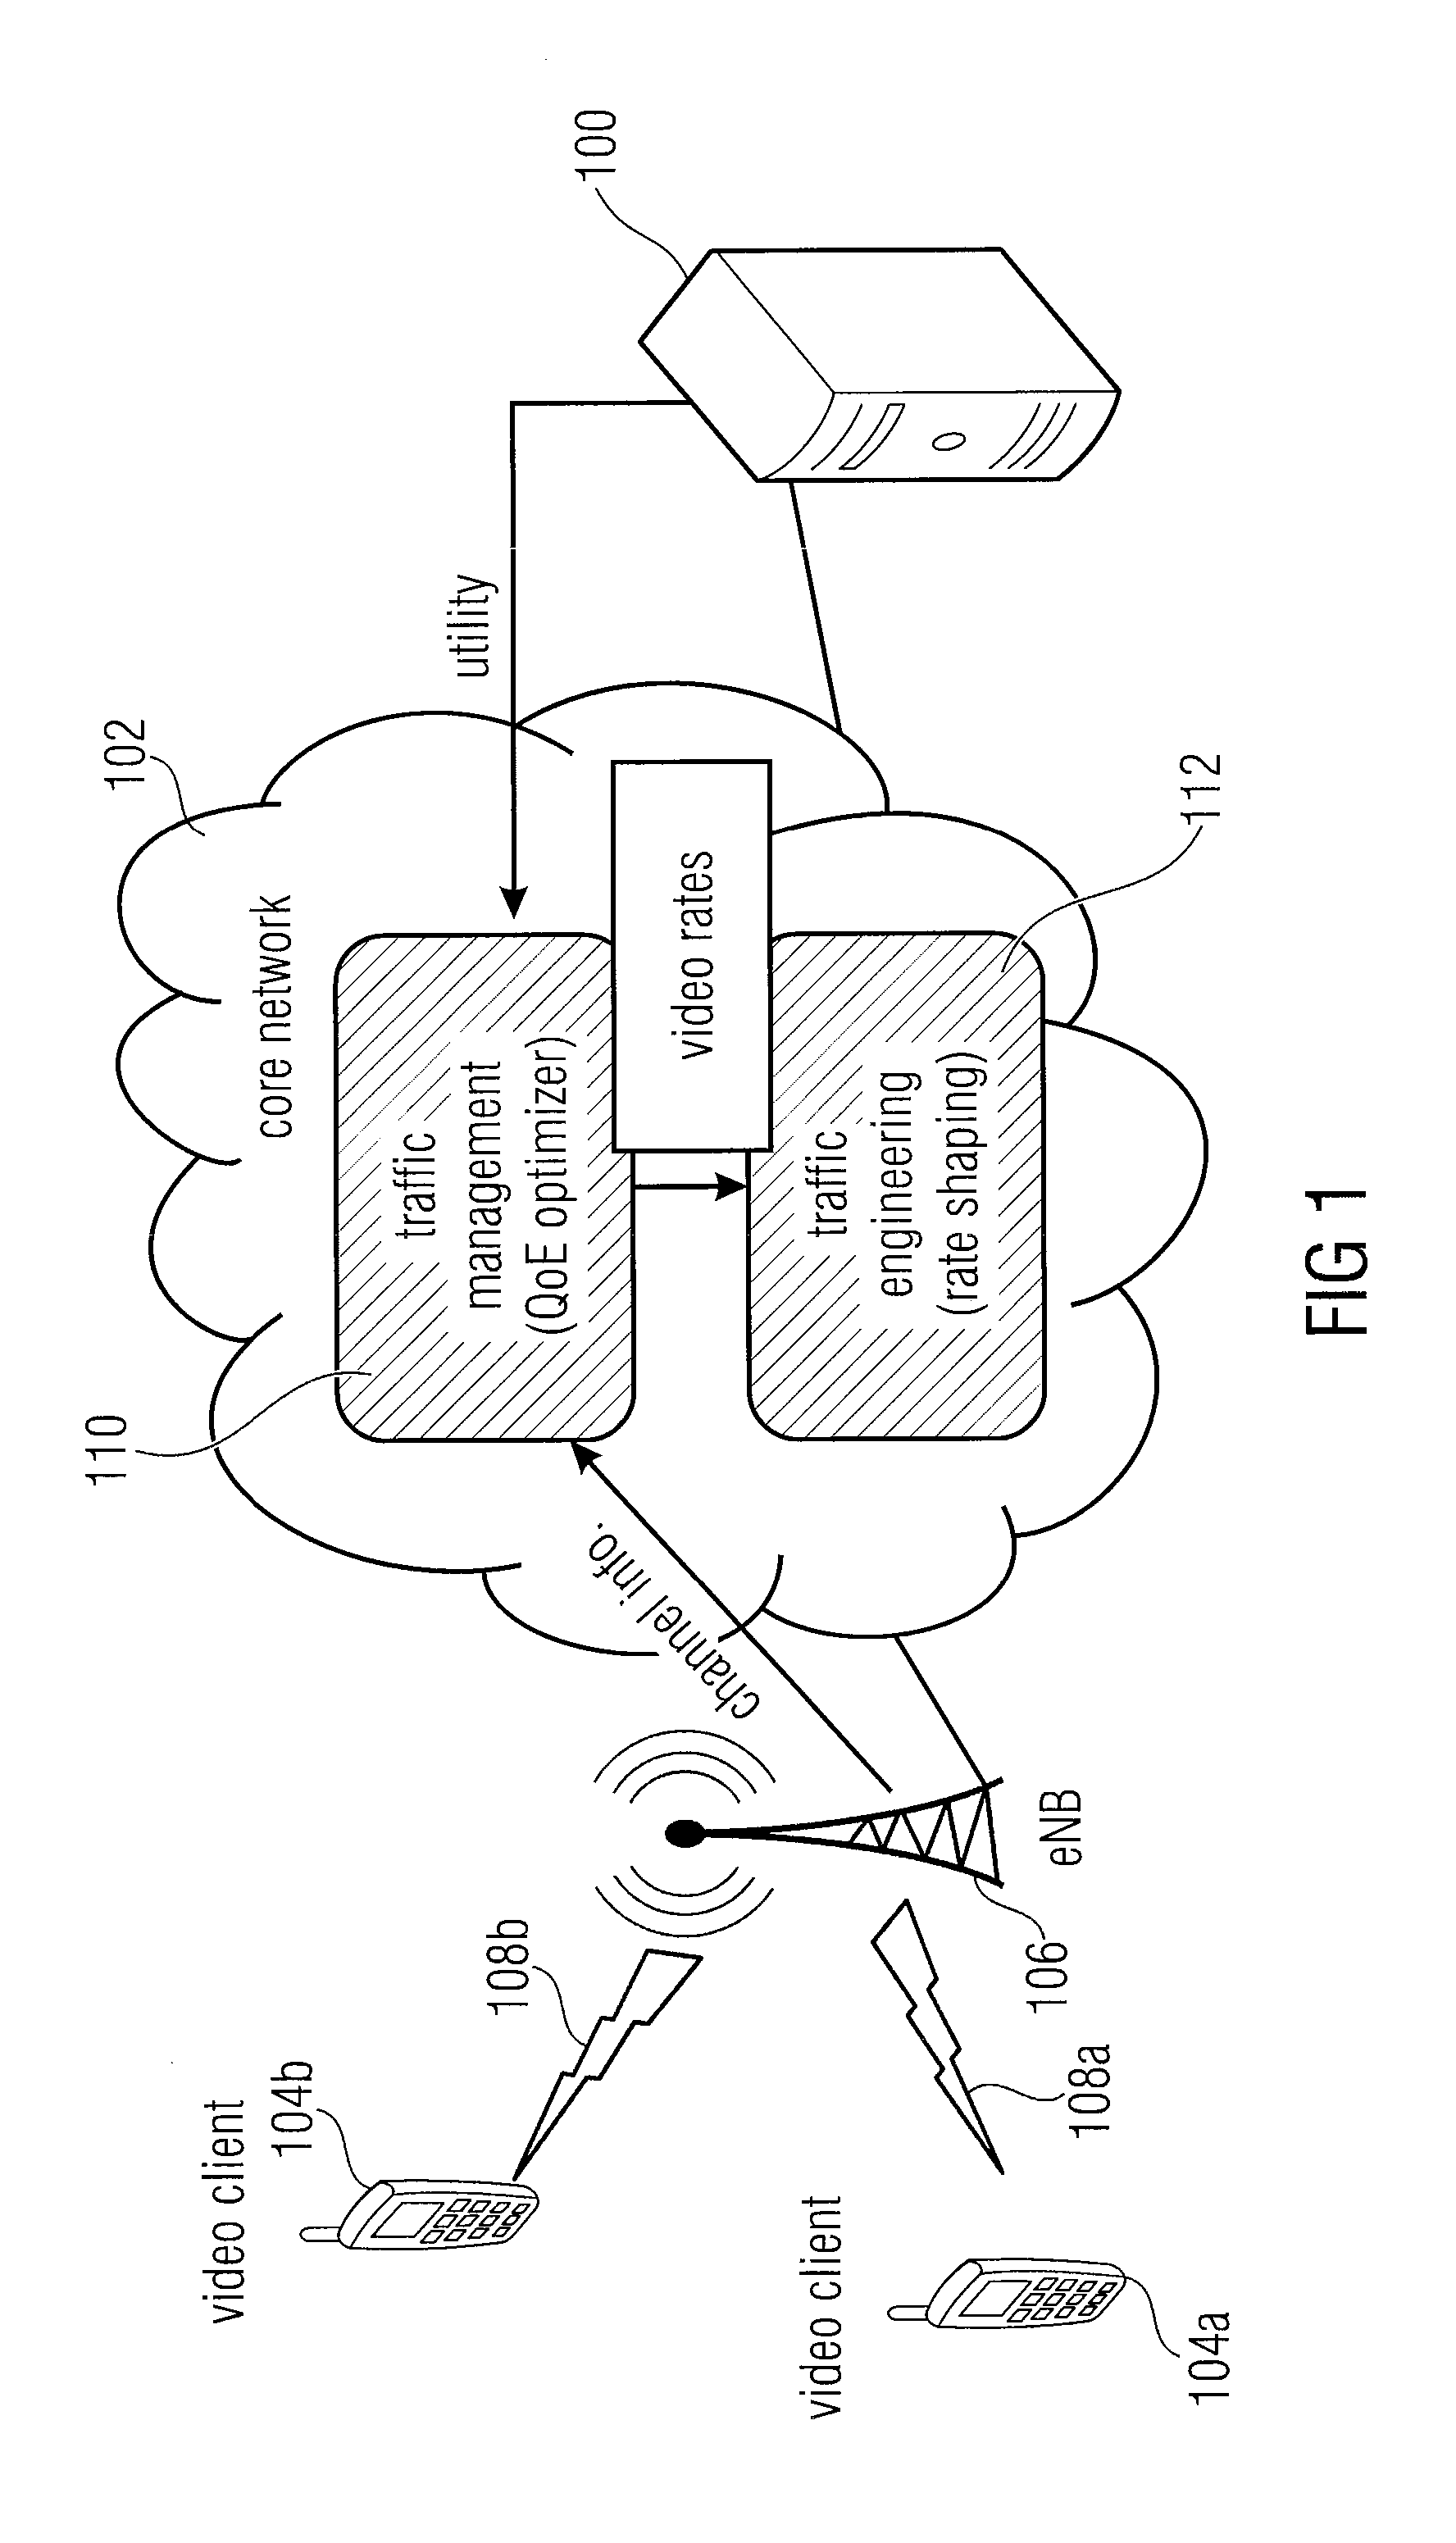 Method, system and network for transmitting multimedia data to a plurality of clients